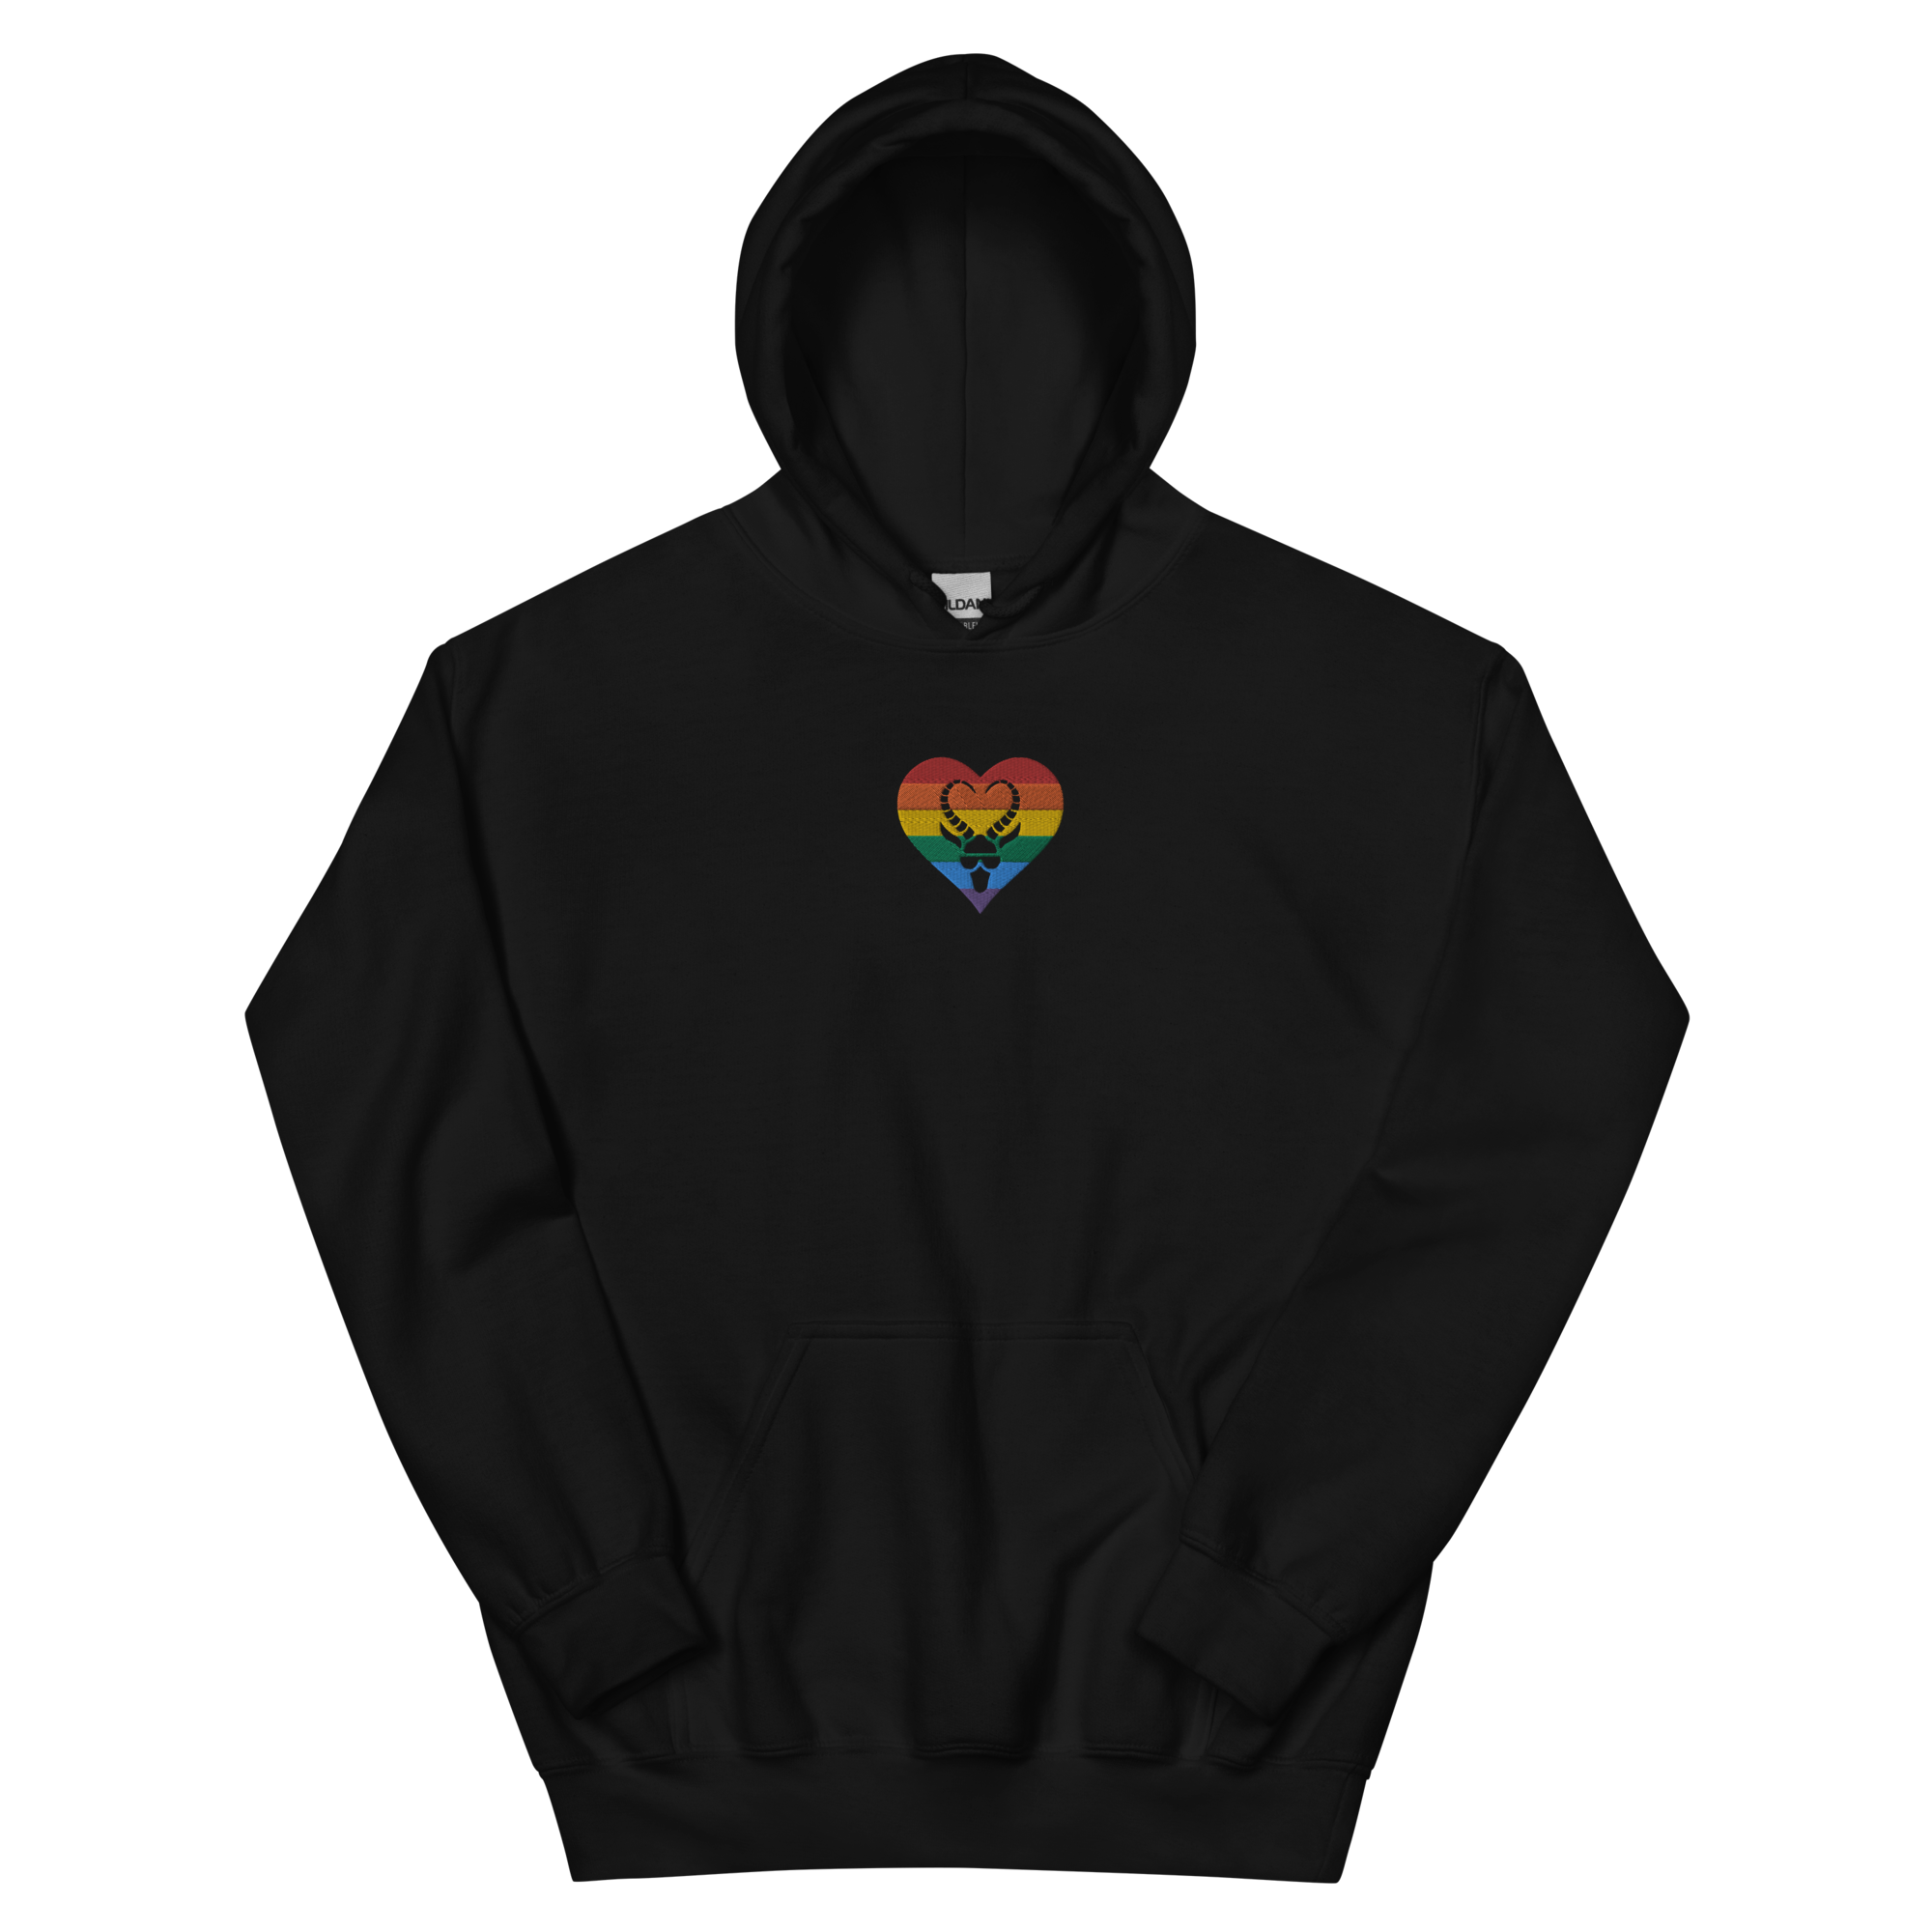 Pride Heart Hoodie - Embroidered Heart Flag Wrapped LG Logo